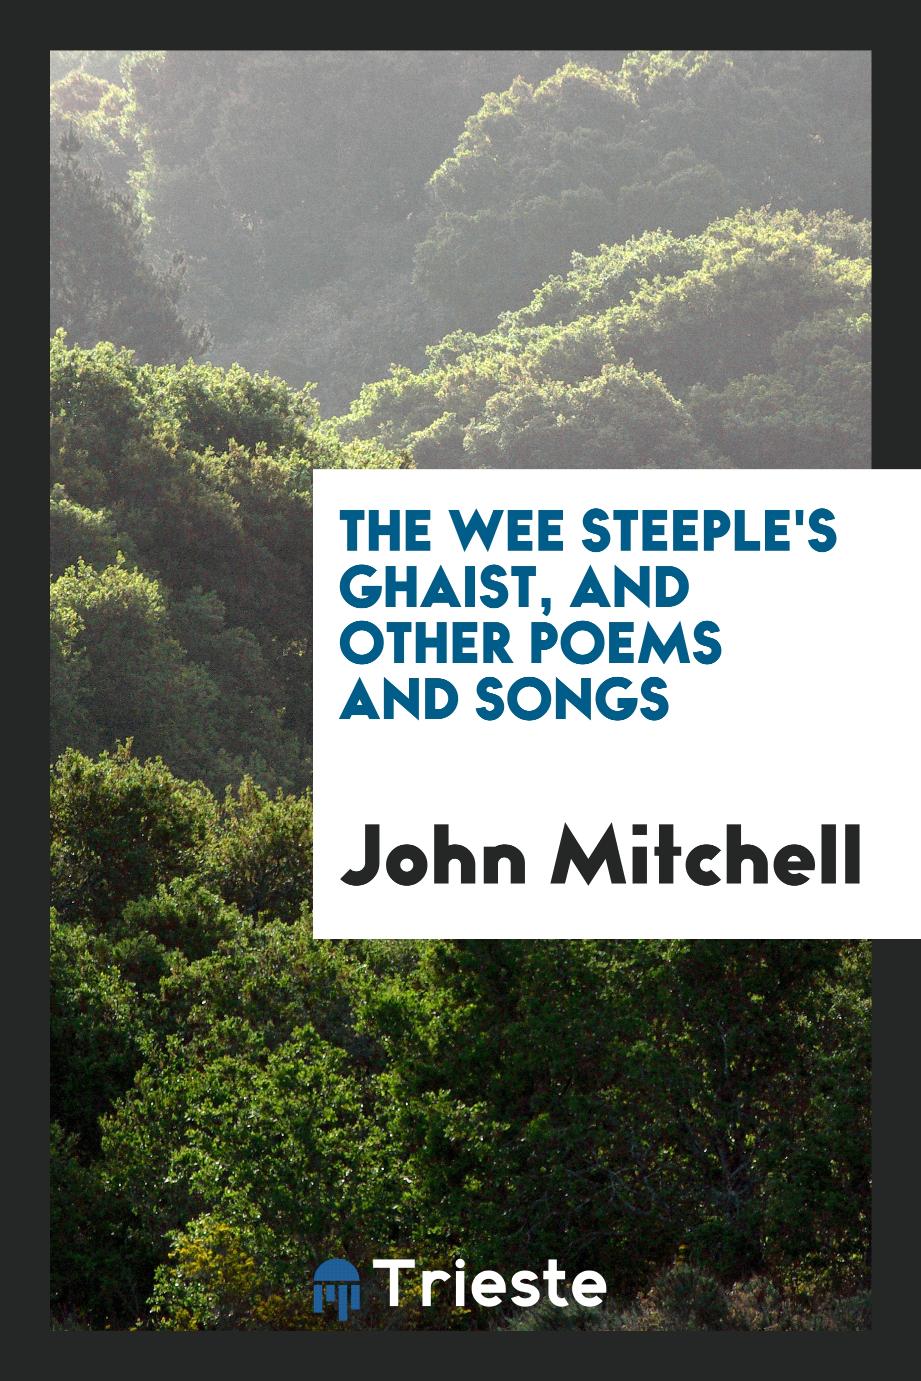 The Wee Steeple's Ghaist, and Other Poems and Songs